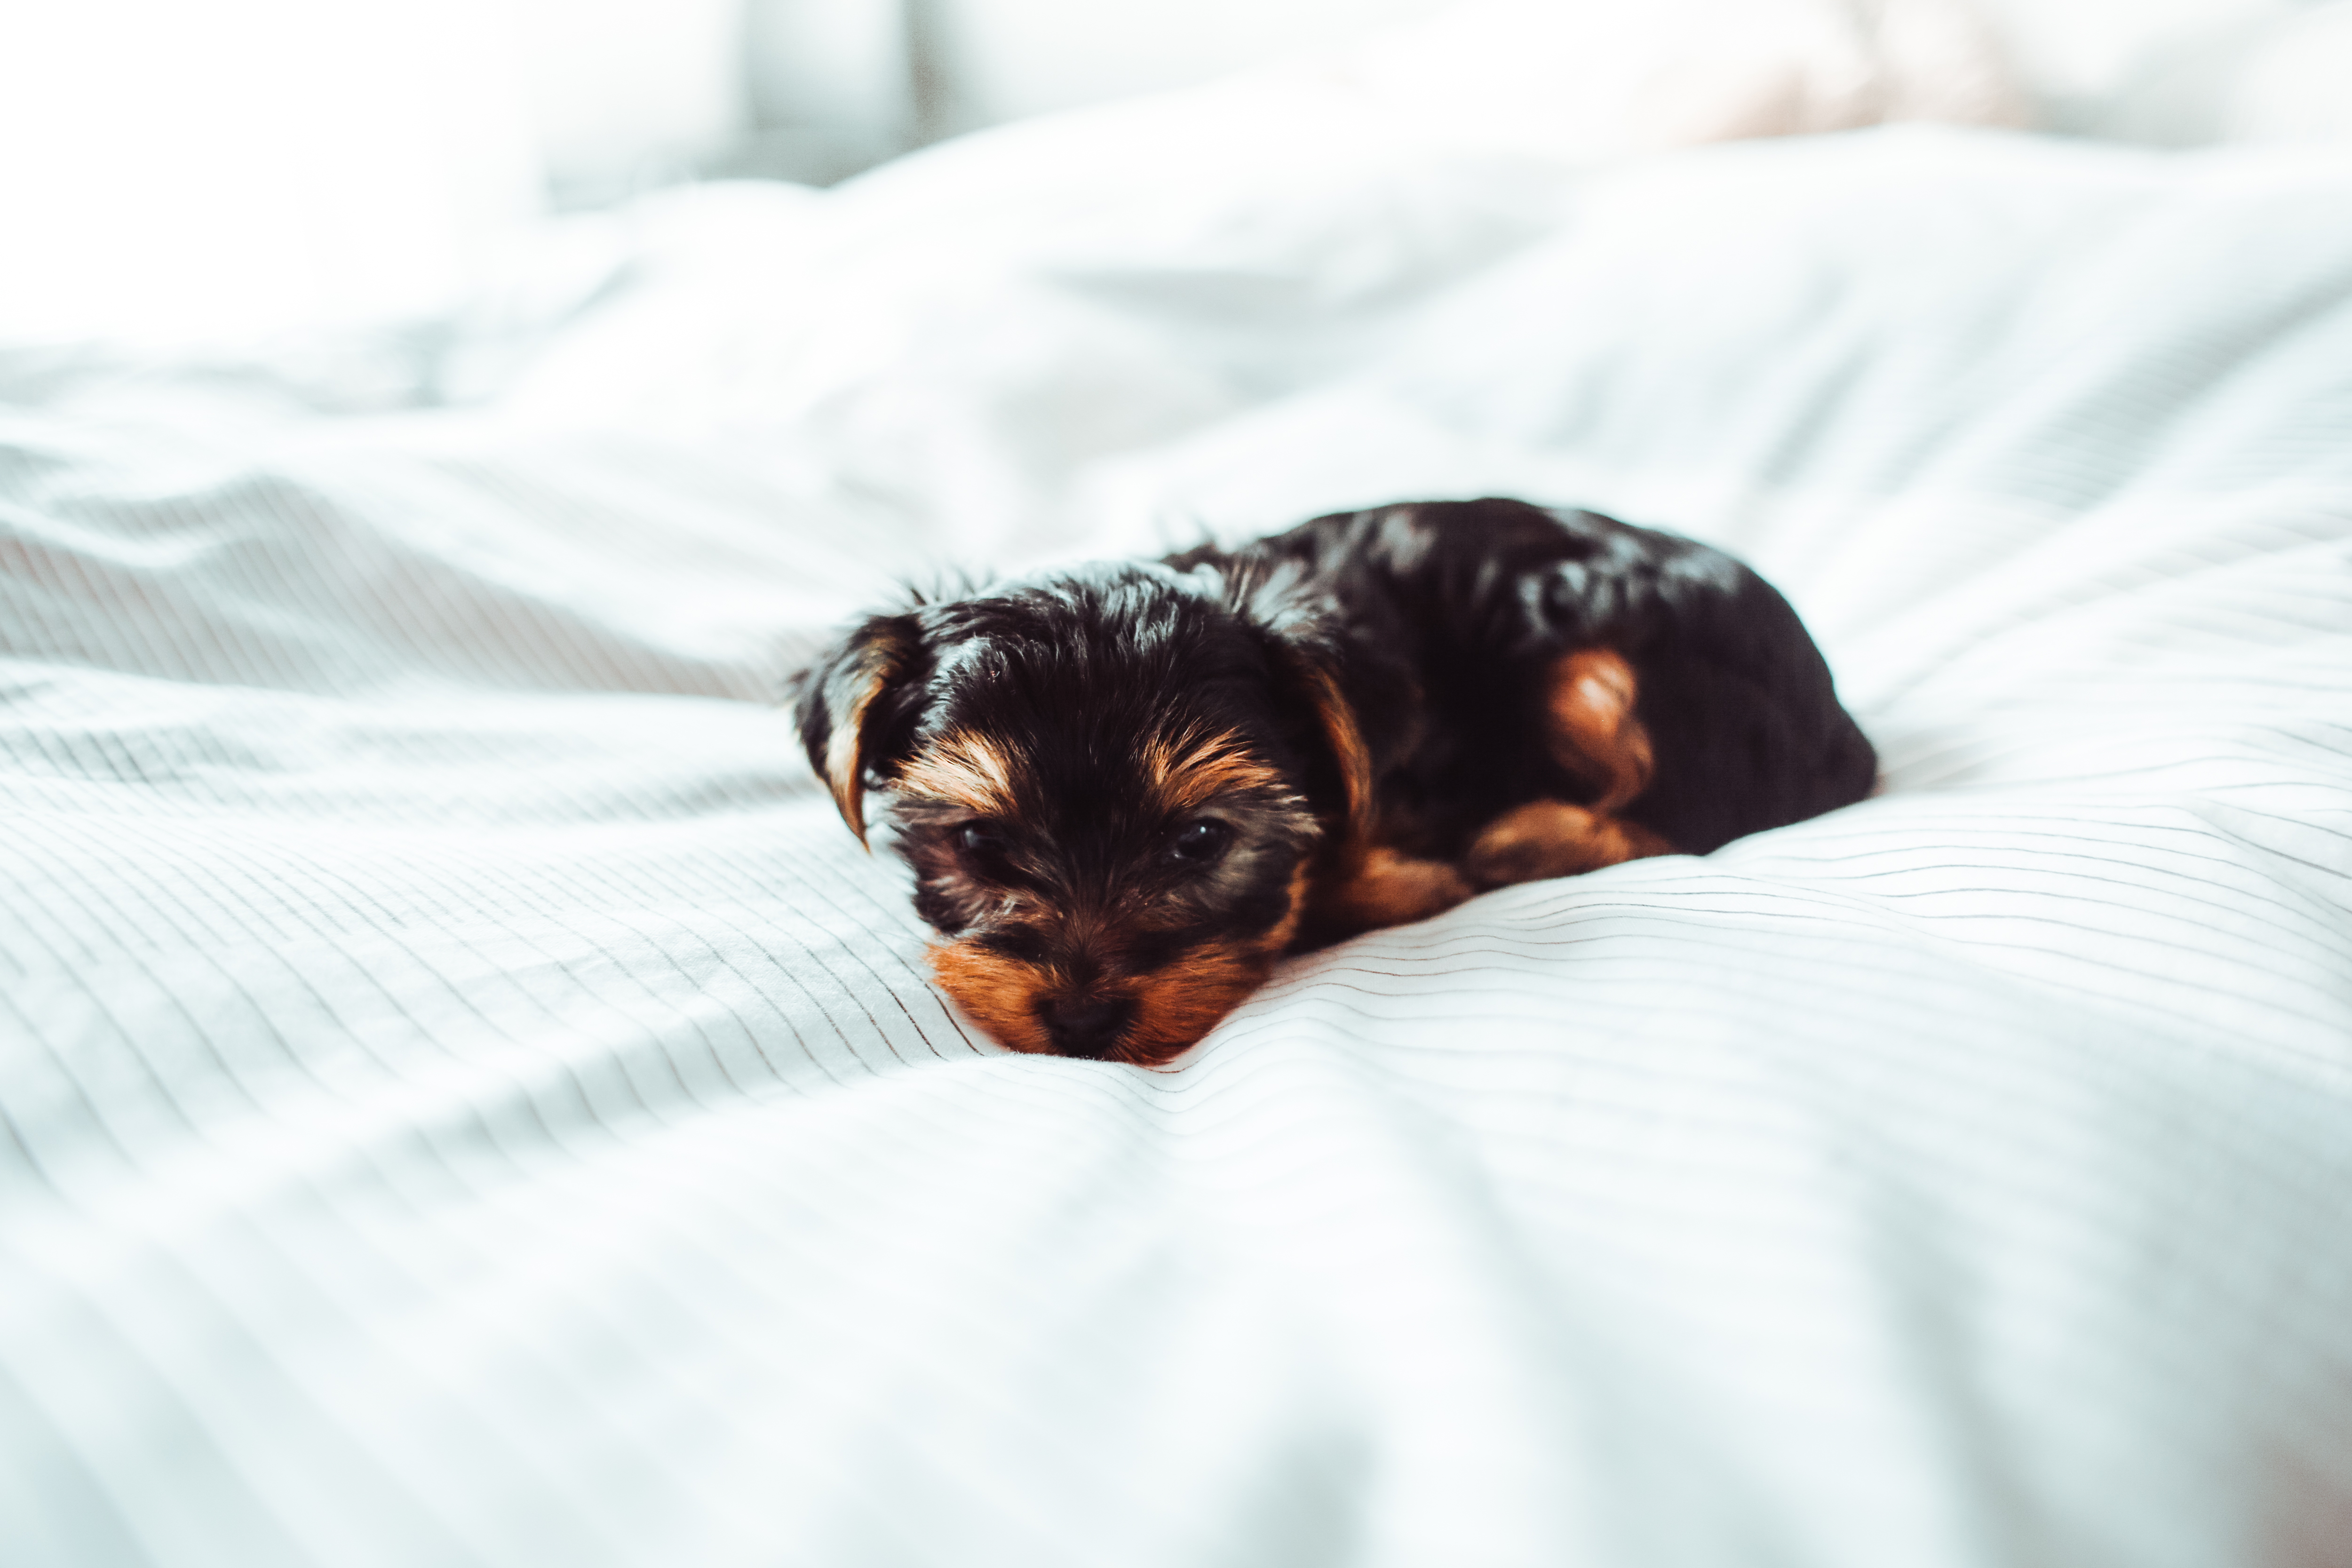 A cute Yorkie puppy peacefully rests on a bed, showcasing its black and brown fur.